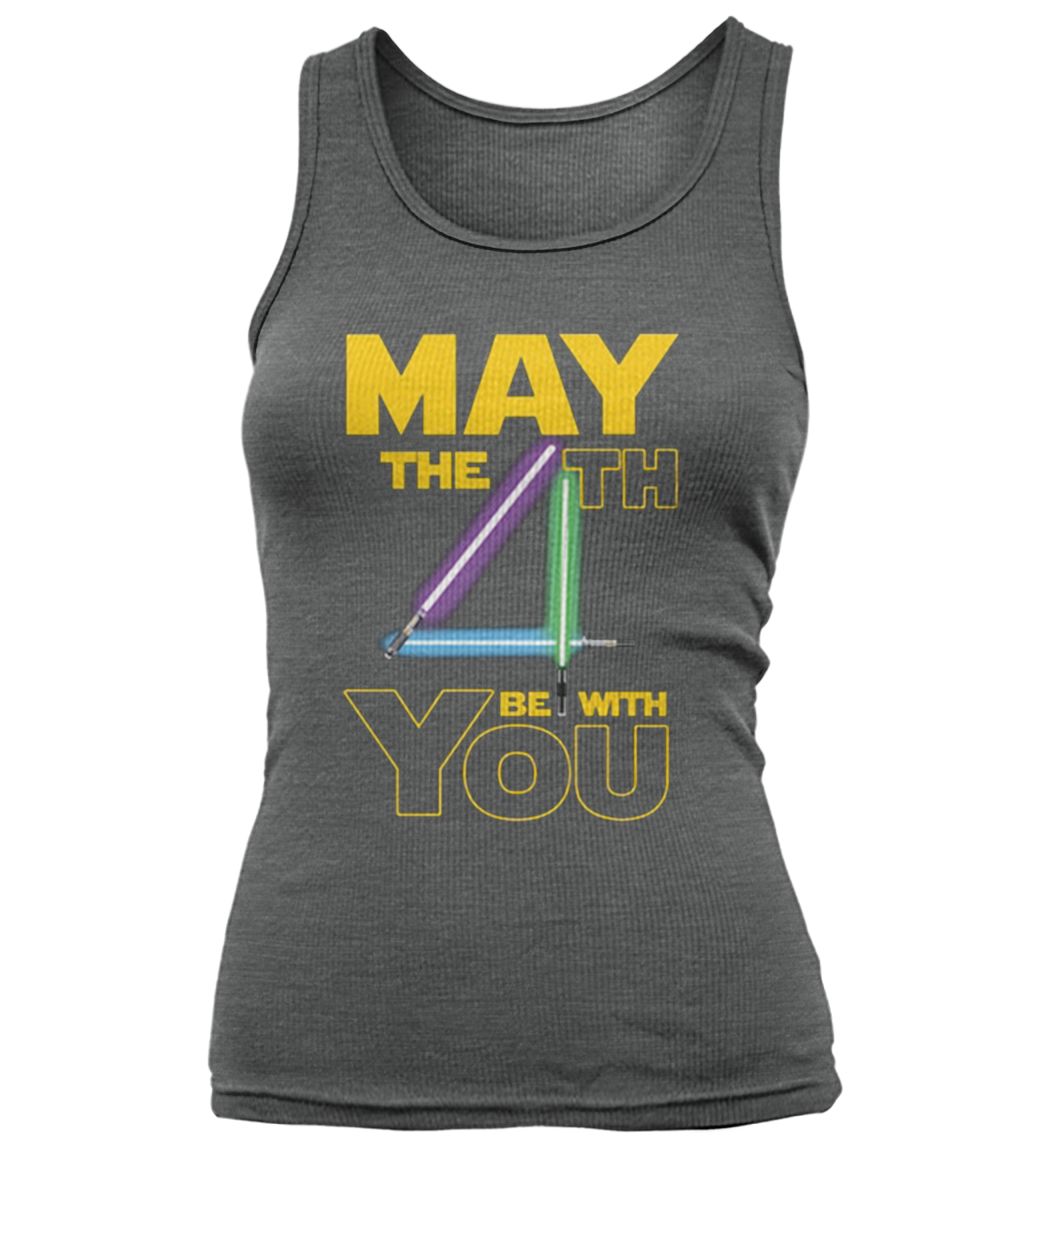 Star wars may the 4th be with you women's tank top